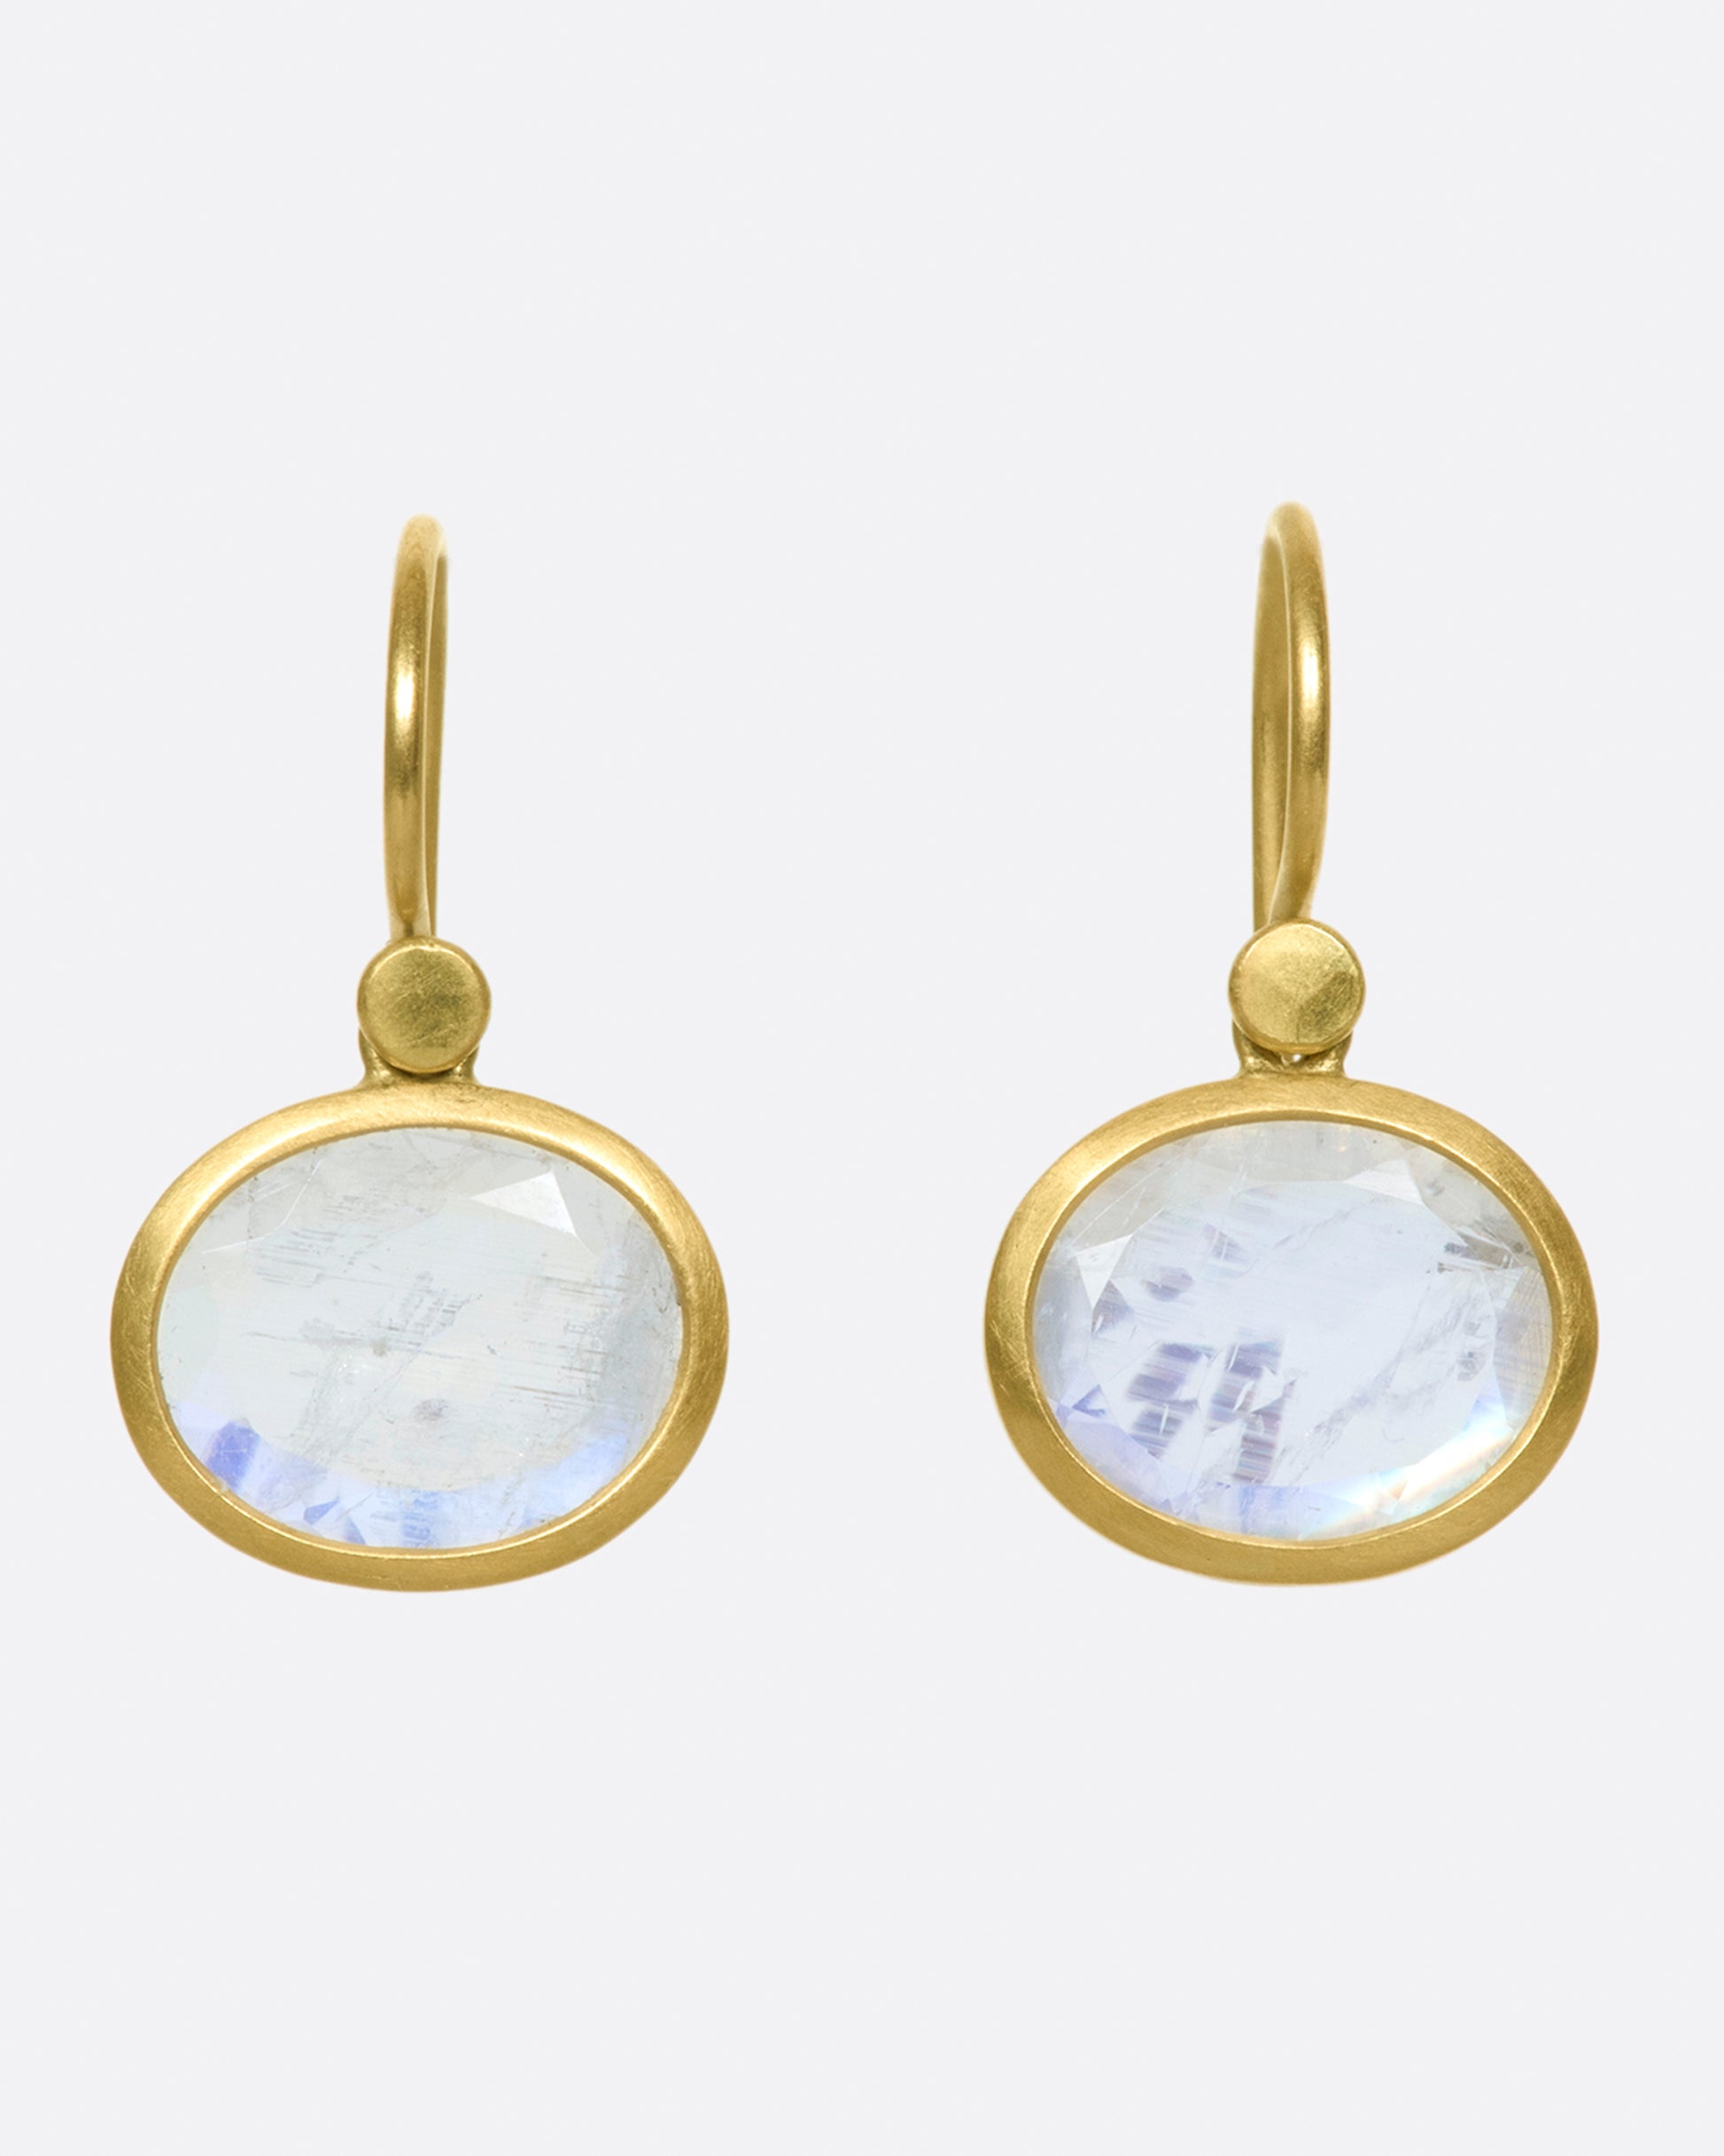 18k gold dangling earrings with oval moonstone drops